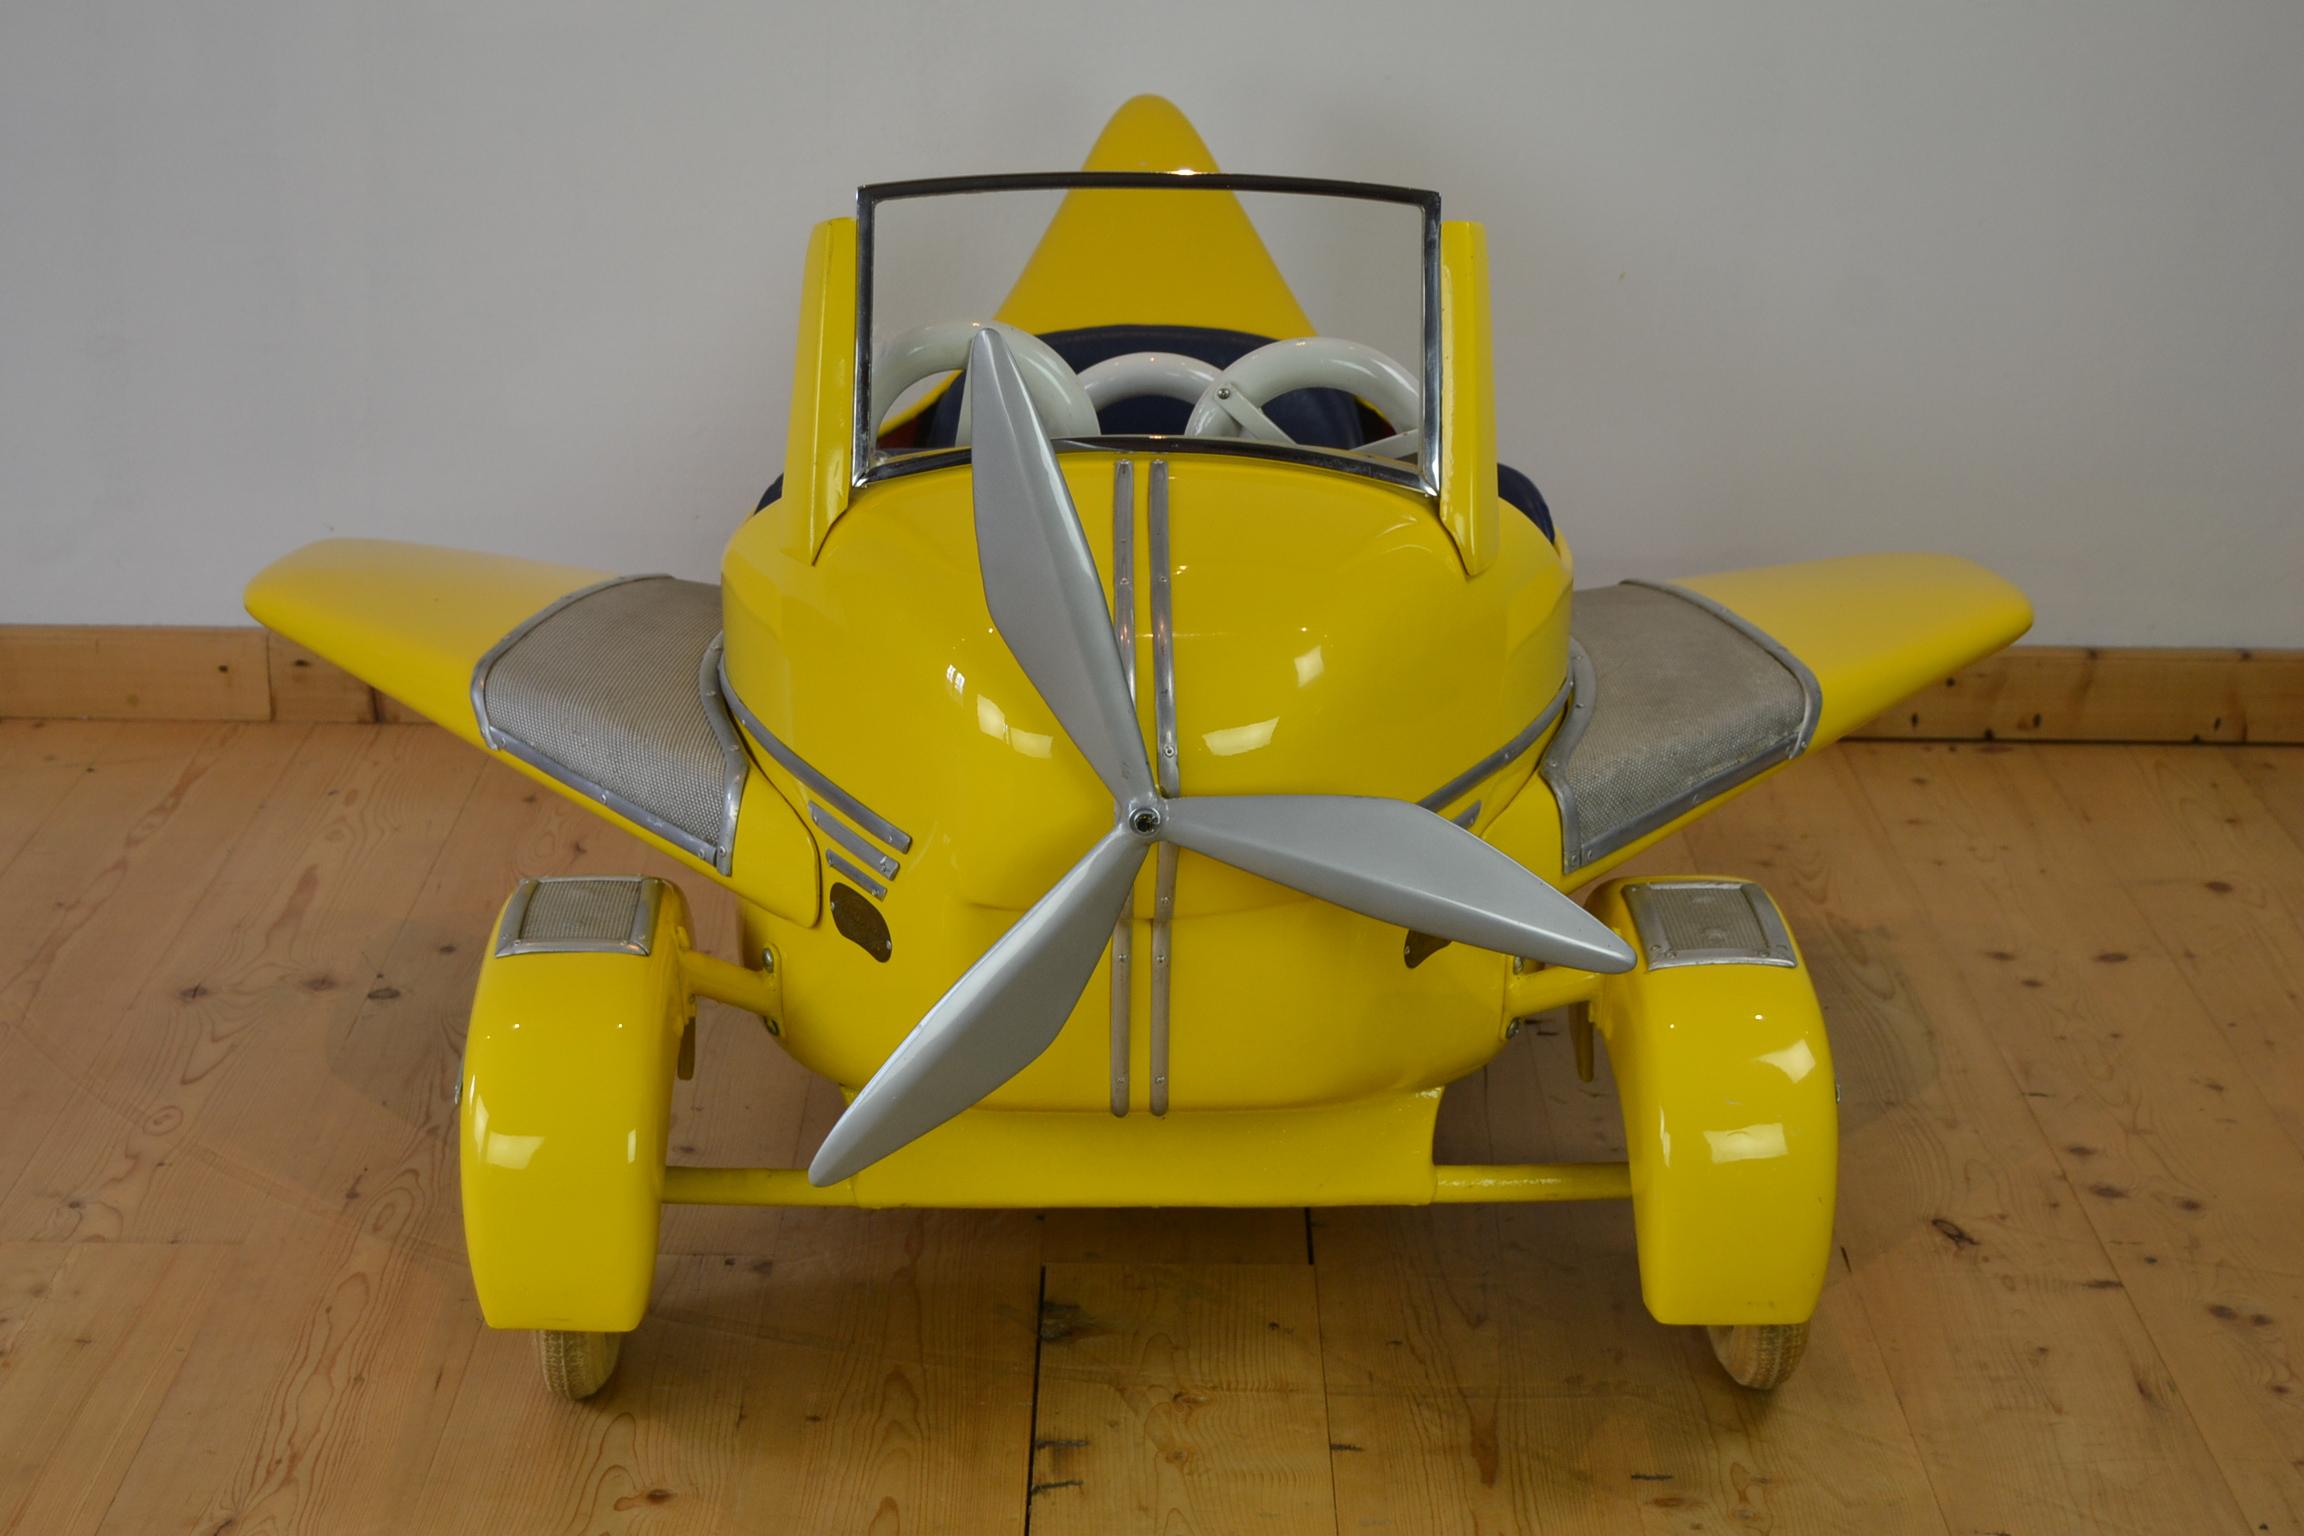 Great Carousel Airplane by L’ Autopède Belgium.
This carousel plane has the beautiful eye-catching color yellow. It’s a metal fairground aeroplane which was made in the 1950s by the Belgian Atelier L’Autopède - Autopede – L’Autopède which was